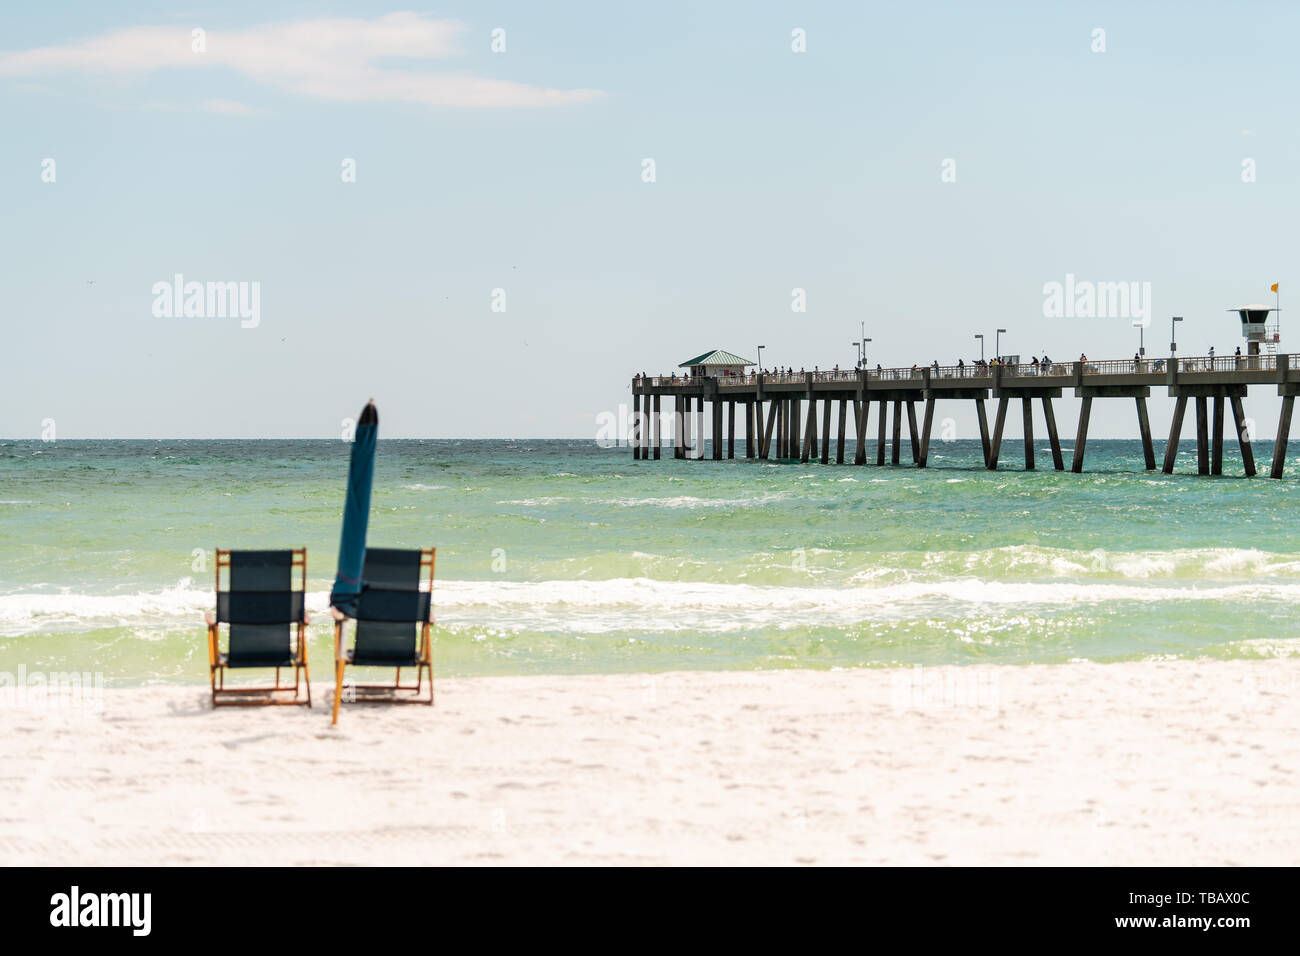 Okaloosa fishing pier in Fort Walton Beach, Florida Panhandle in Gulf of Mexico with two empty beach recliner lounge chairs and umbrella Stock Photo